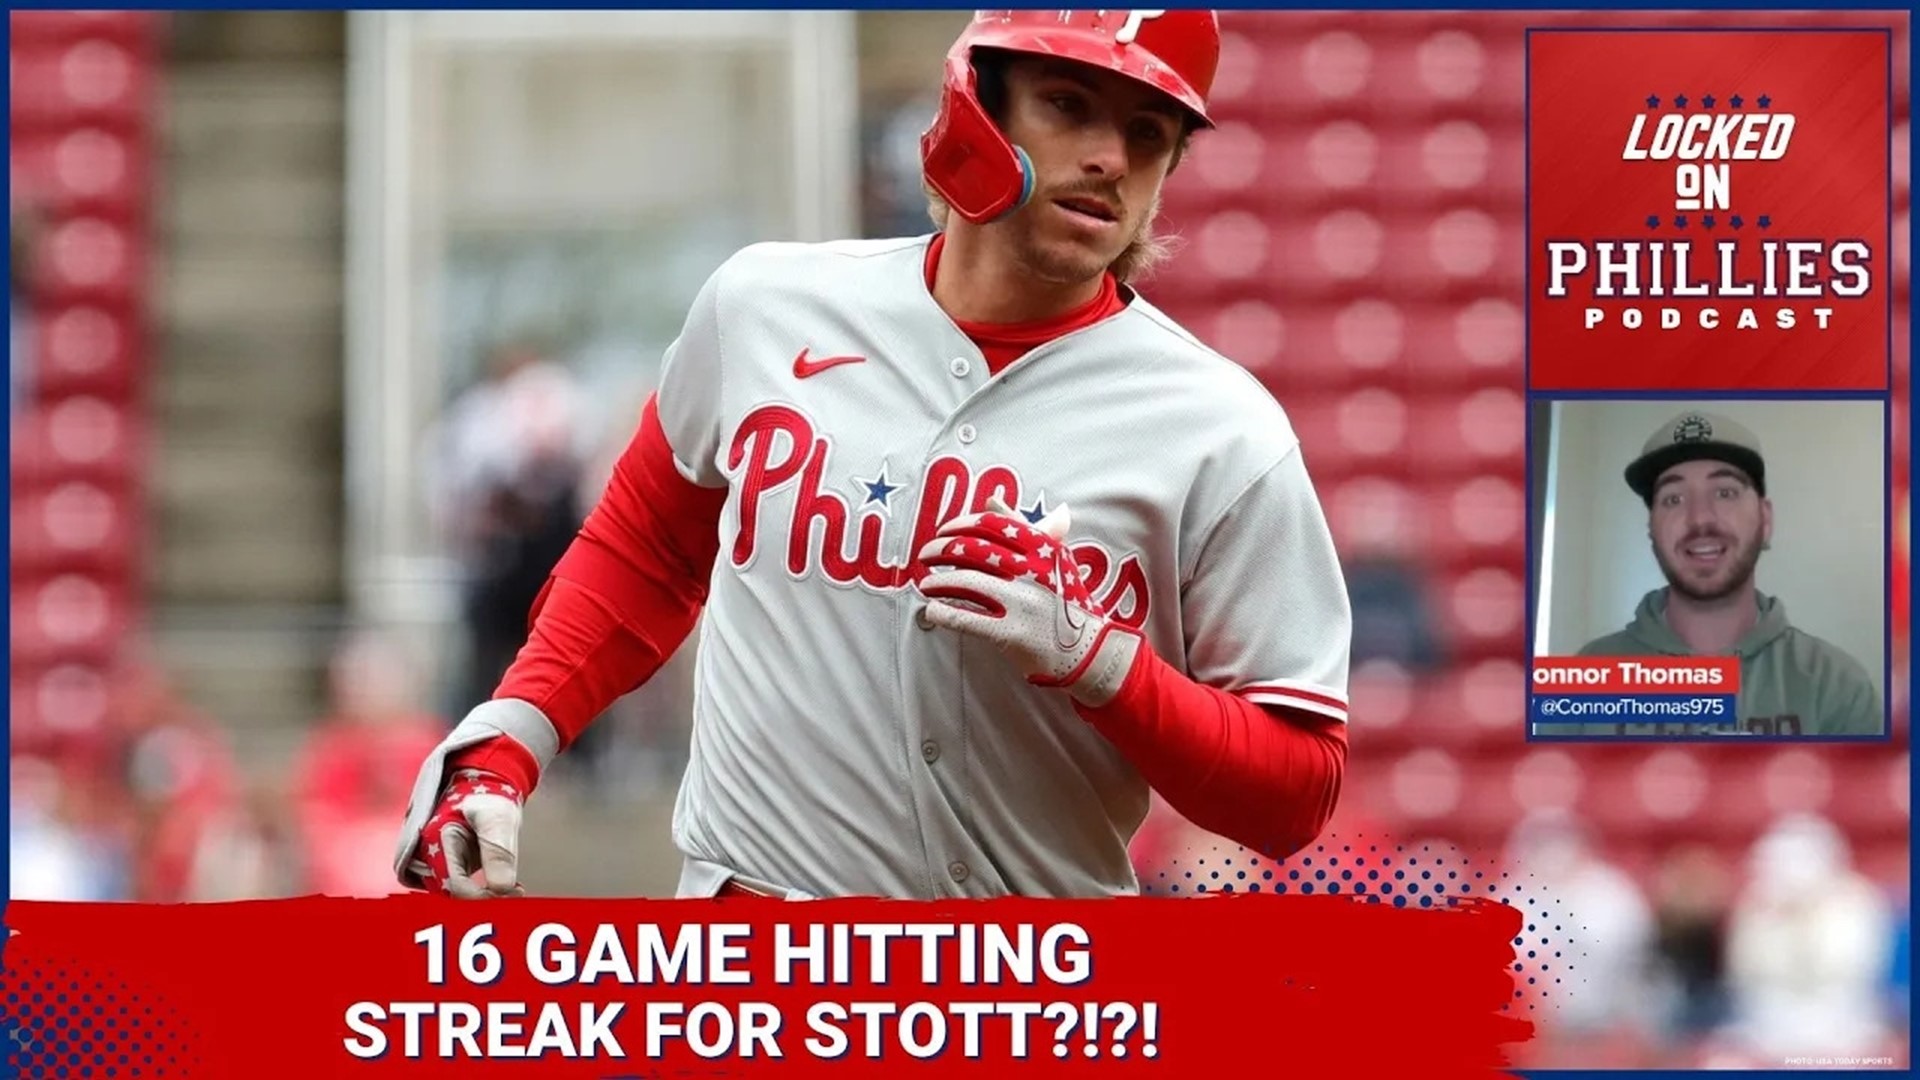 Bryson Stott Ties Phillies Record With 16 Game Hit Streak To Start The  Year/Phils-White Sox Preview